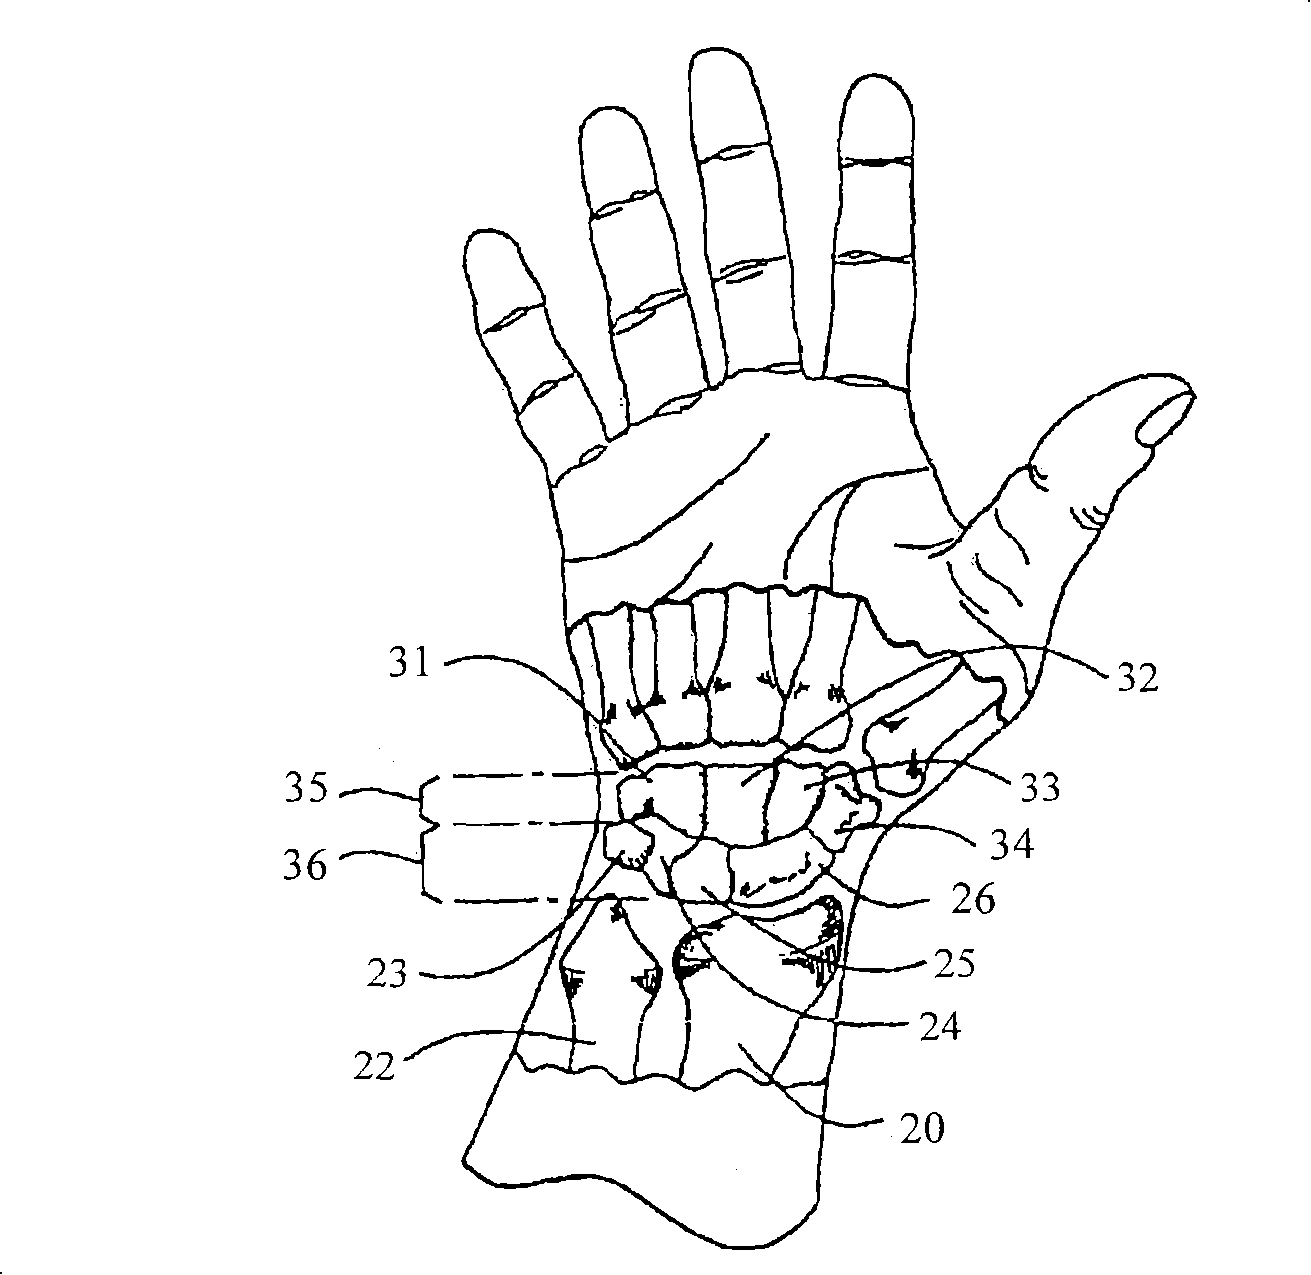 Improved orthotic appliance for carpal tunnel syndrome